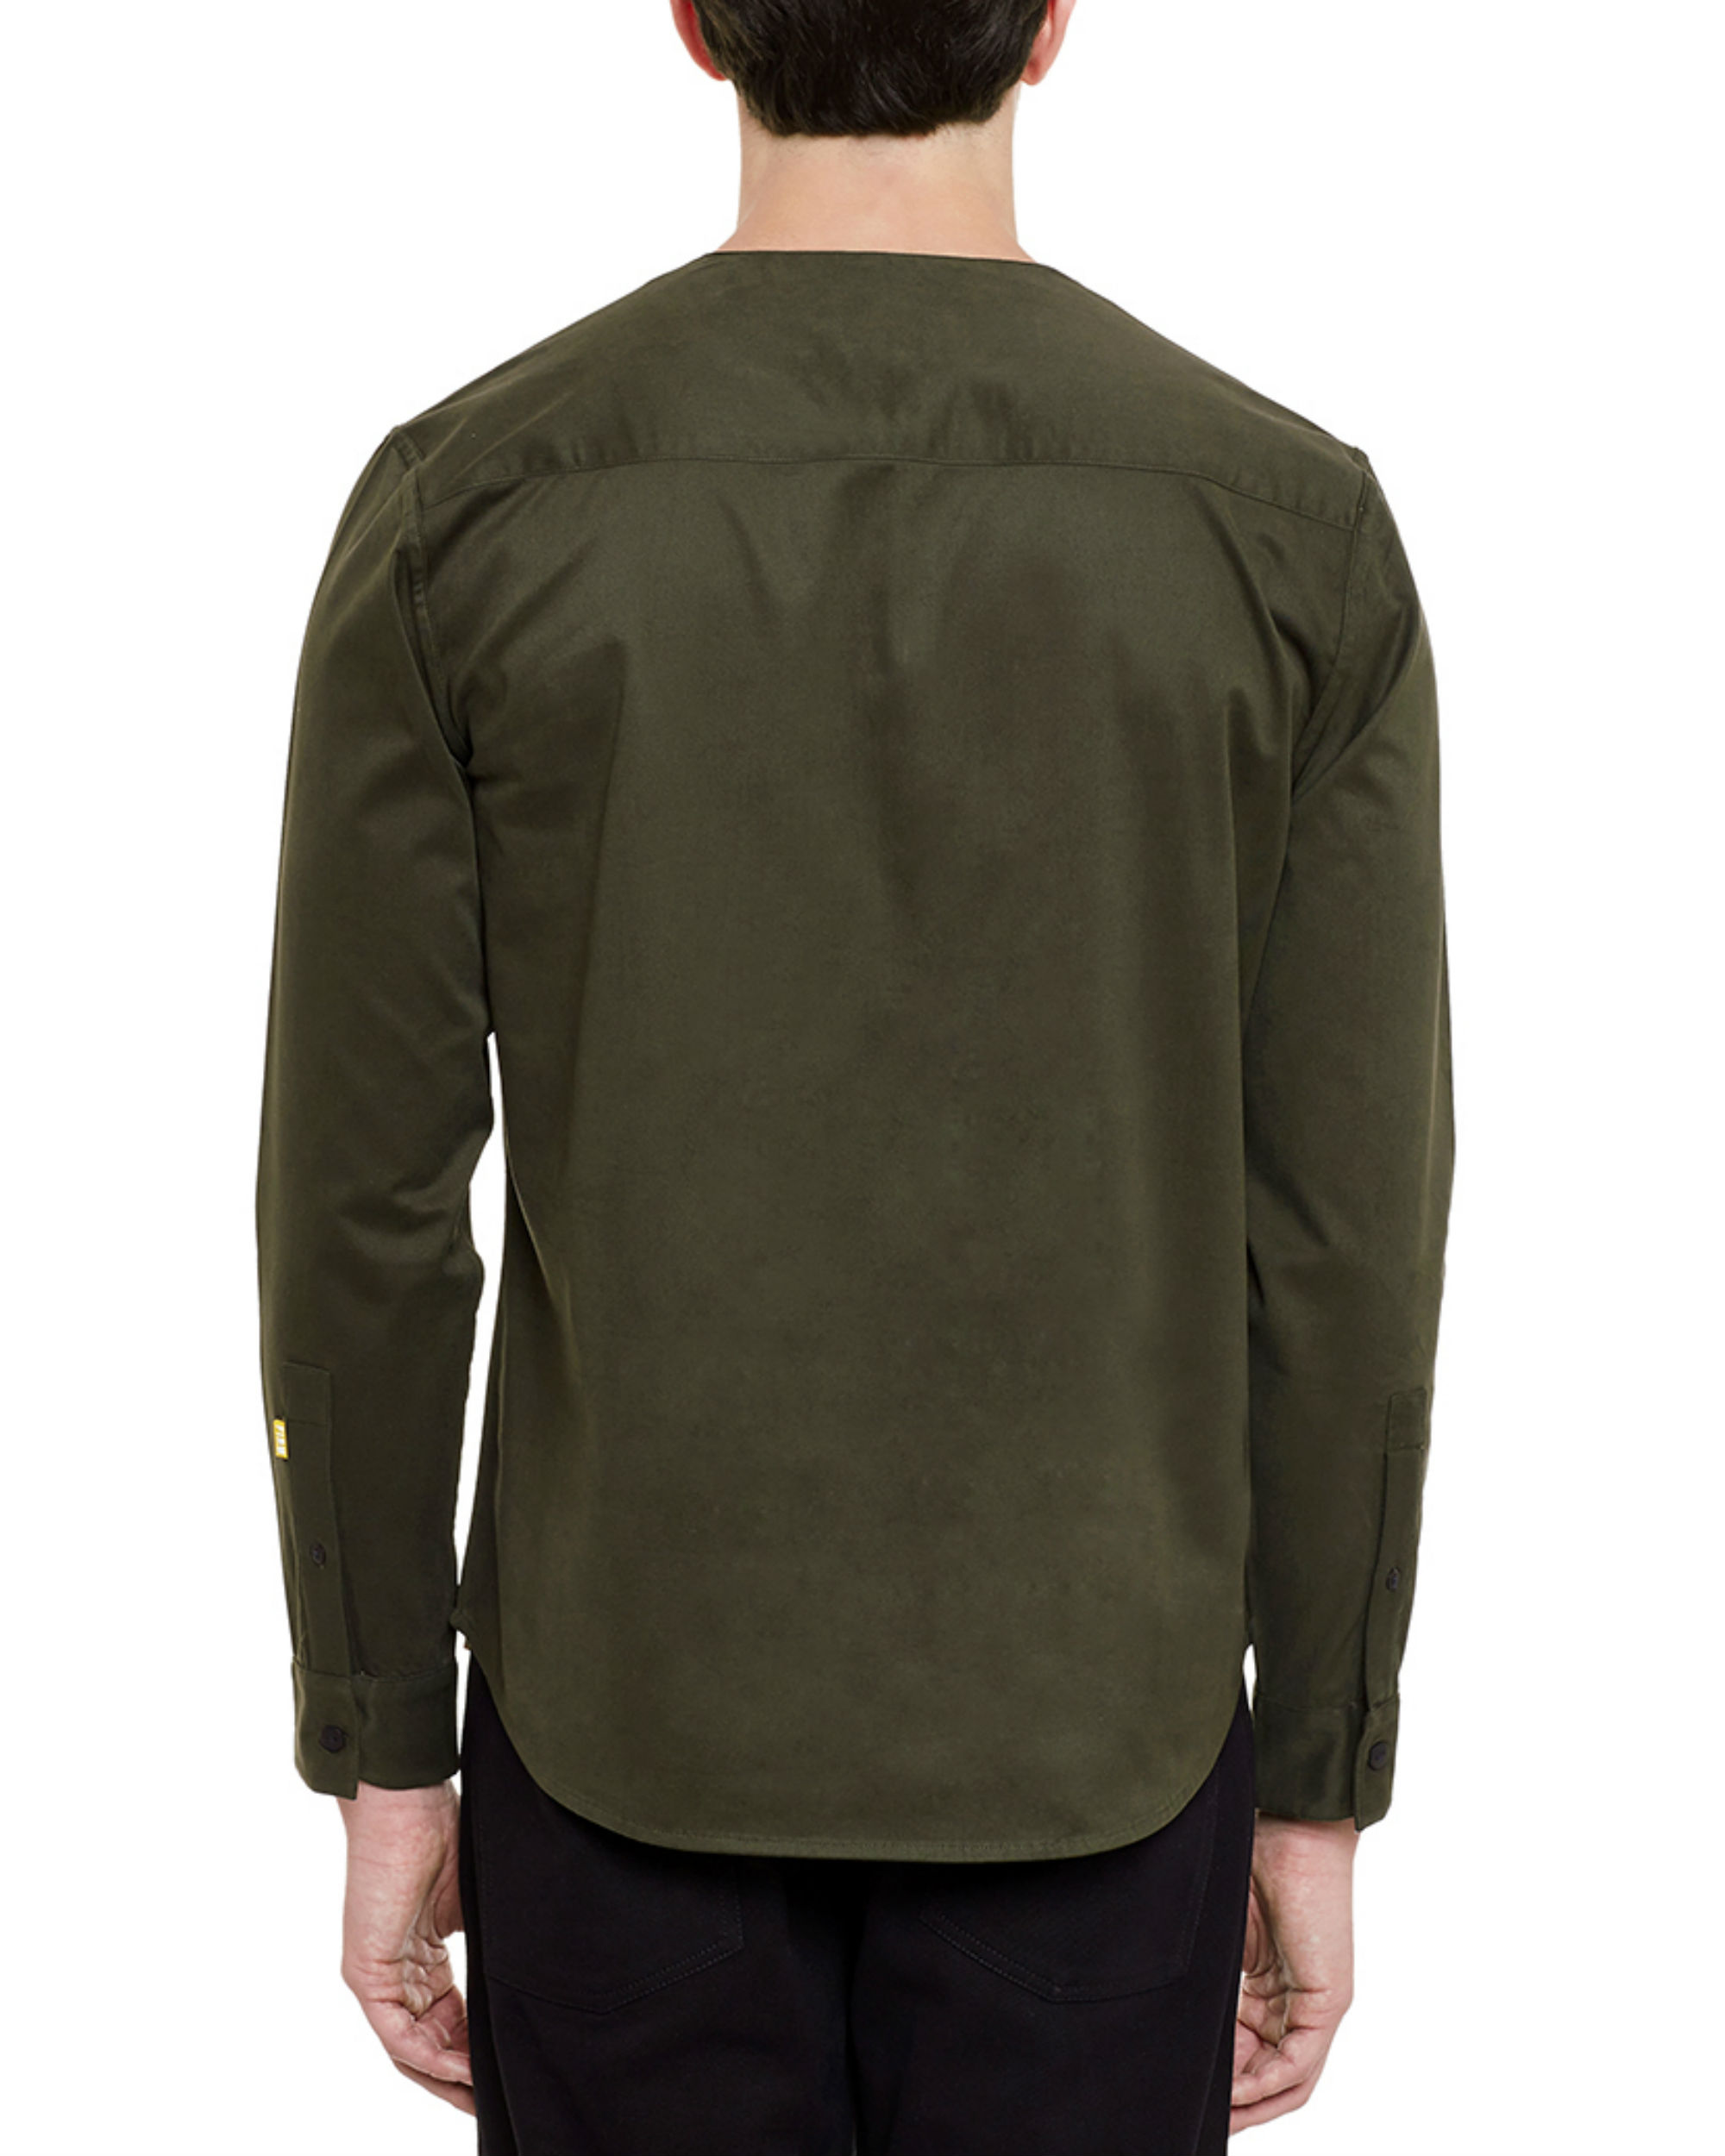 Olive henley shirt by Firm Clothing | The Secret Label